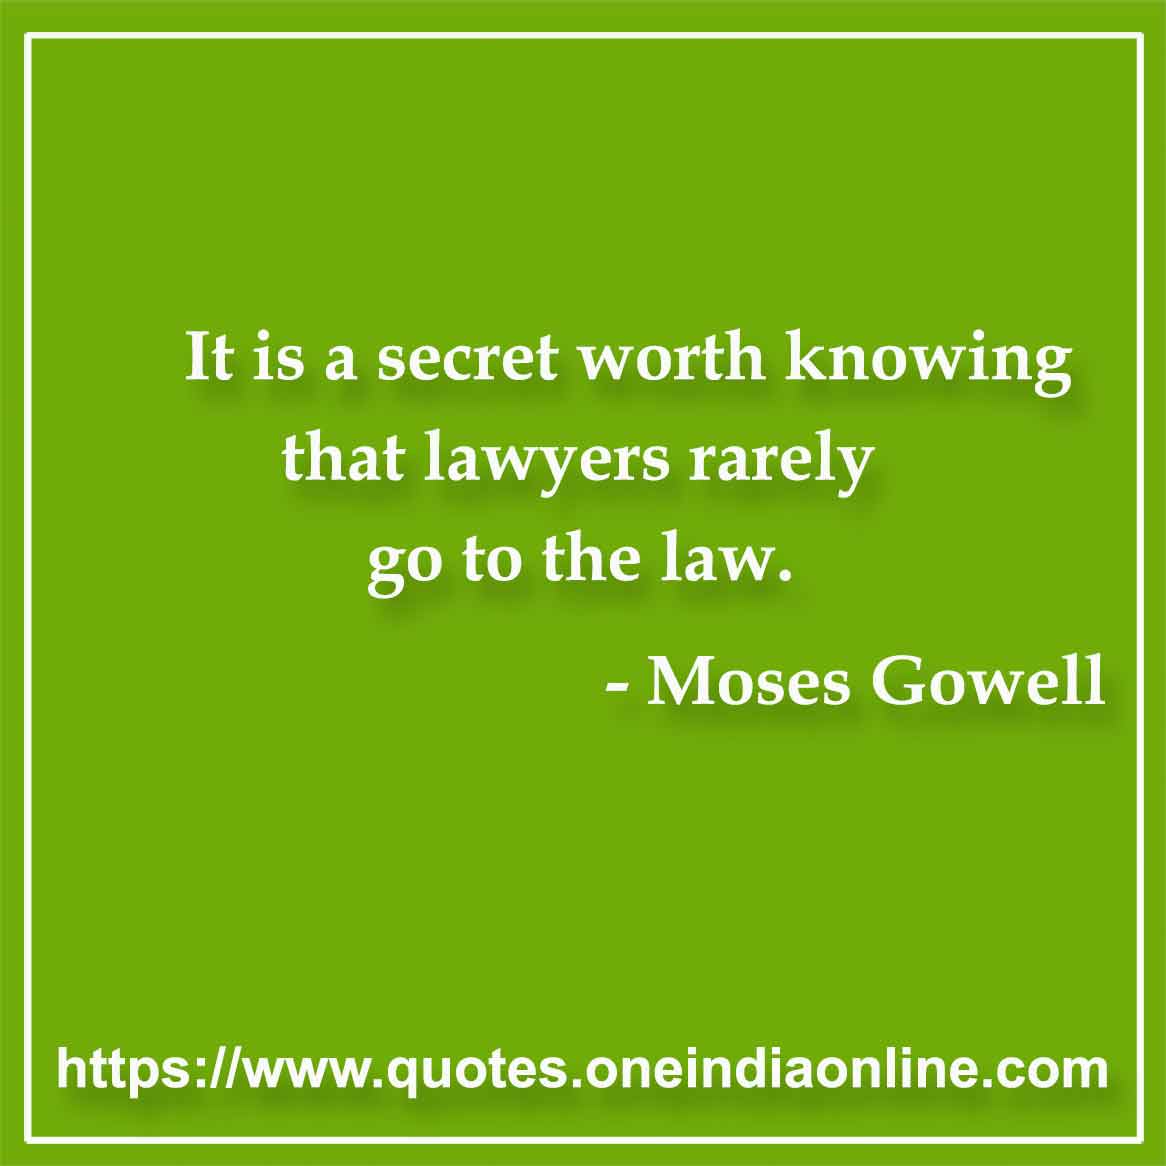 It is a secret worth knowing that lawyers rarely go to the law. 

-  Moses Gowell